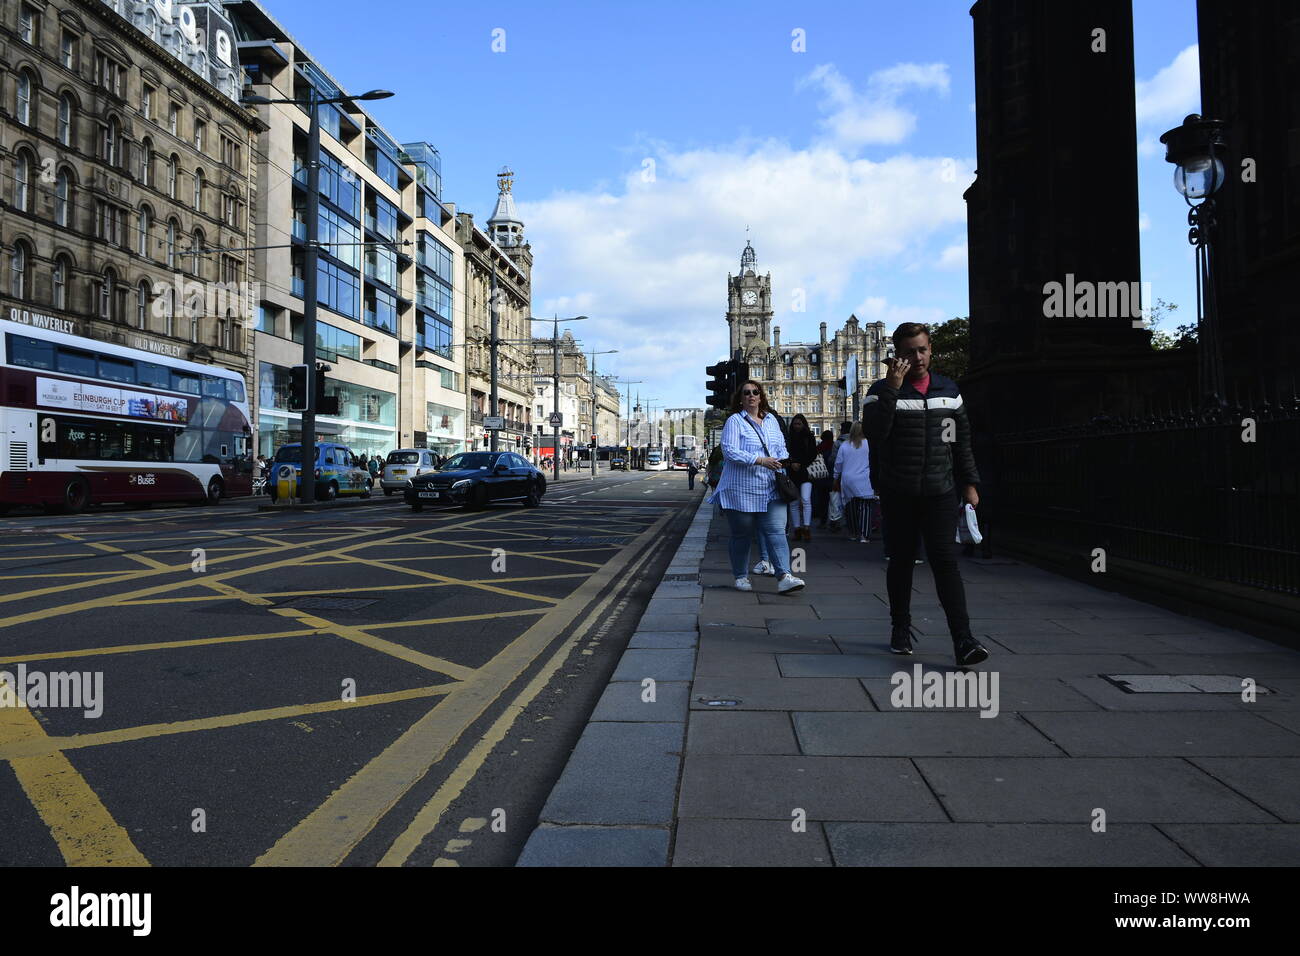 Everyday Life in a City Stock Photo - Alamy